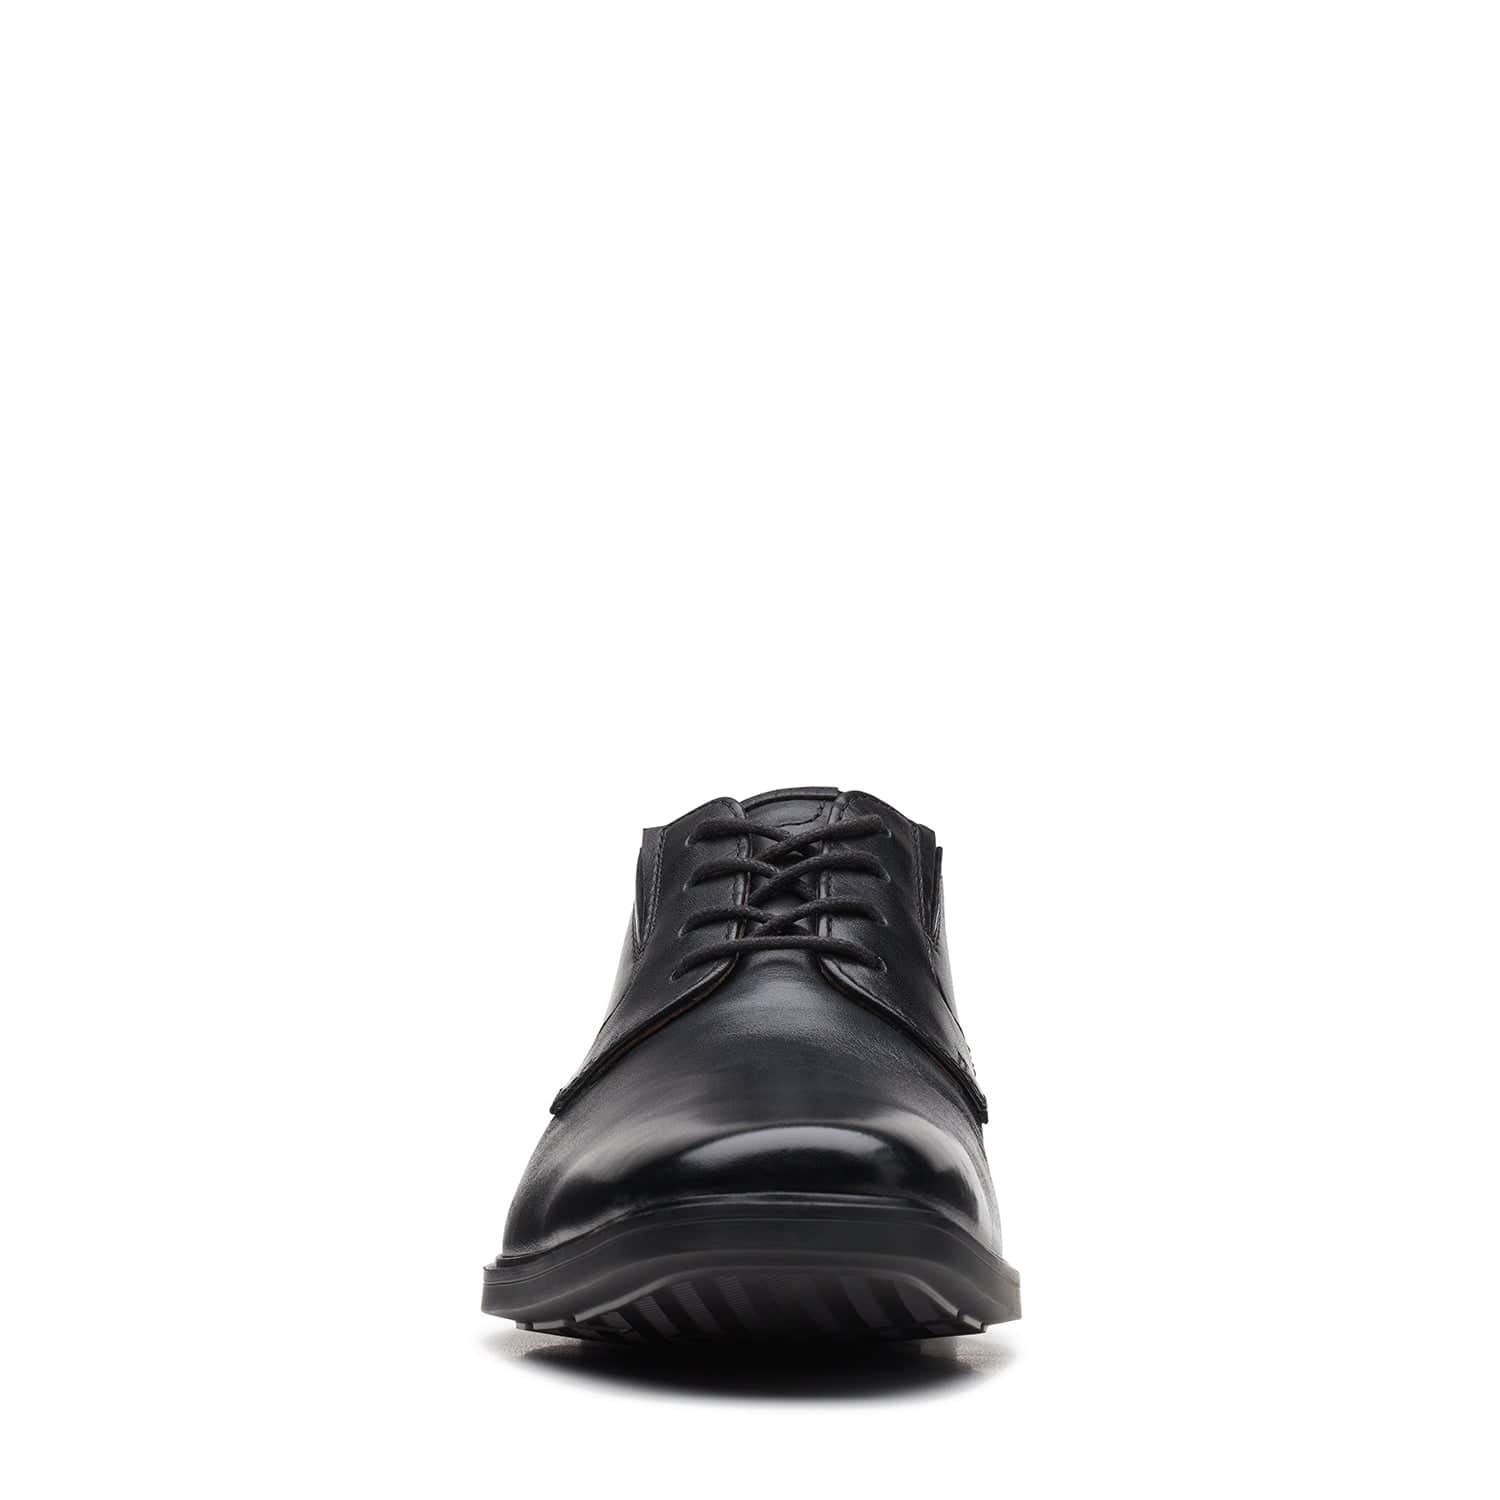 Clarks Clarkslite Low - Shoes - Black Leather - 261678928 - H Width (Wide Fit)